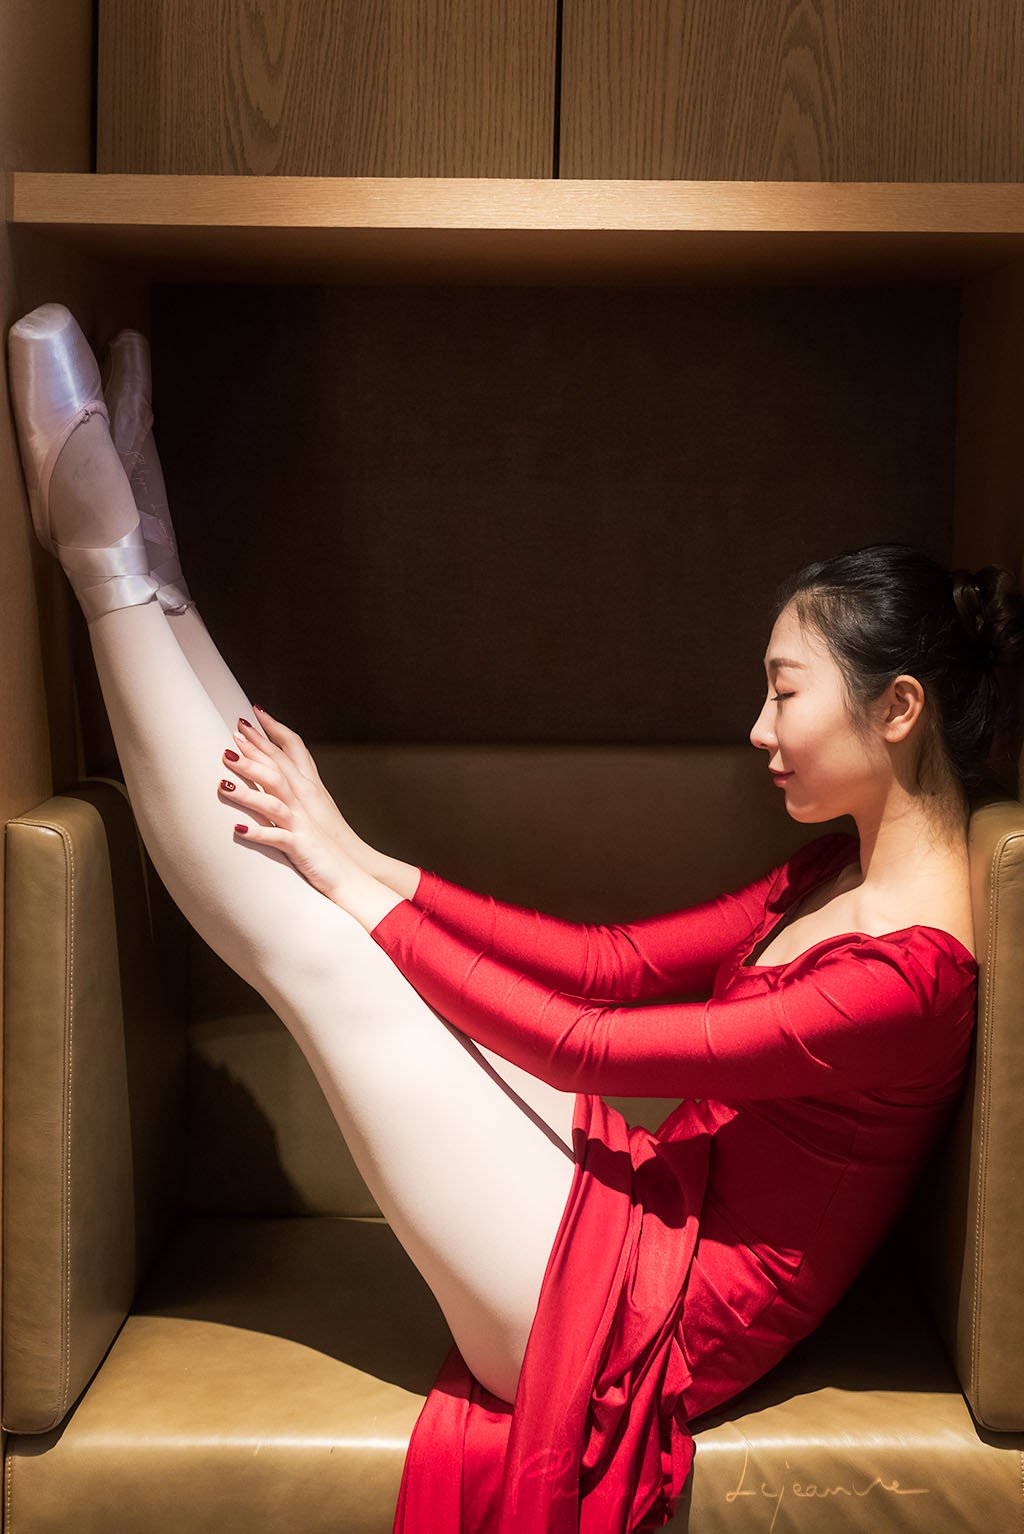 Ballerina streching on a armchair - Photo session organized by @oyuxi for the @instachengdu instagram meetup at Grand Hyatt hotel, Chengdu, Sichuan province, China